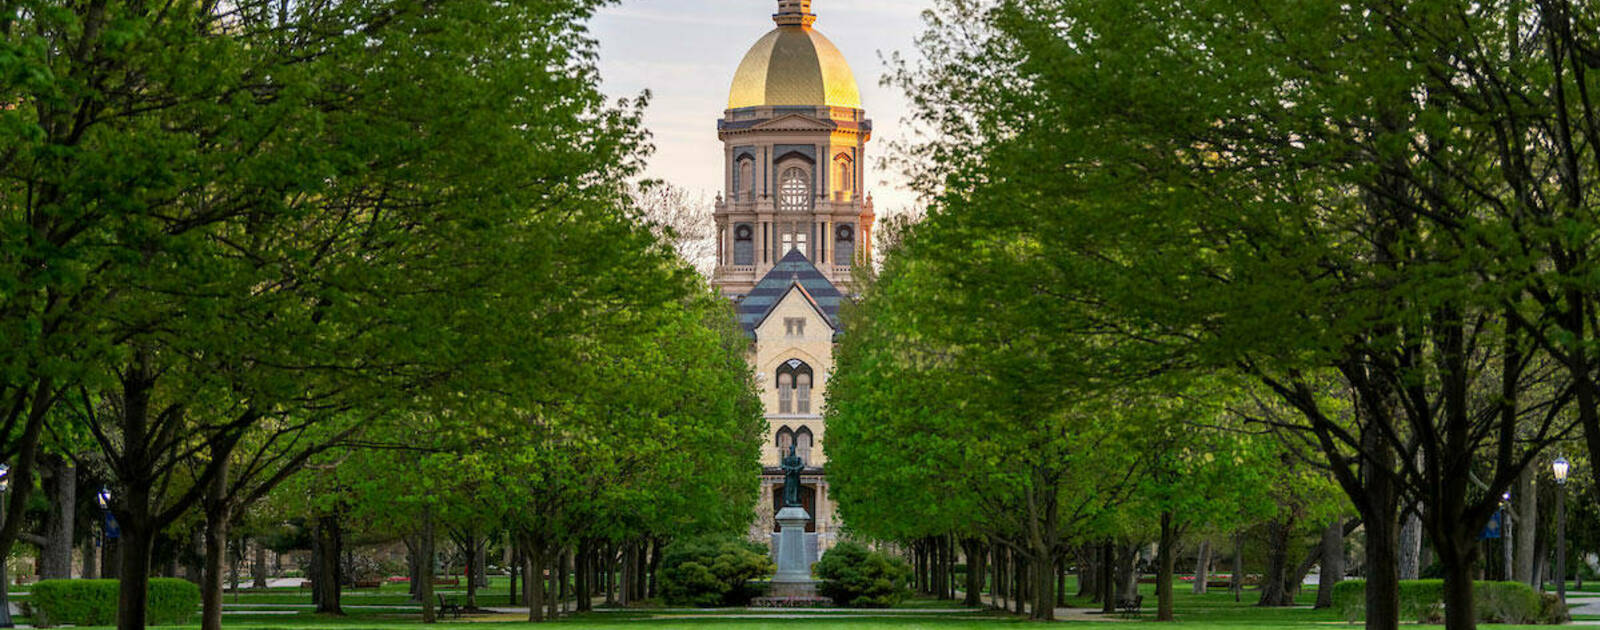 Sheedy family’s leadership gift endows new program at intersection of business and liberal arts | News | Notre Dame News